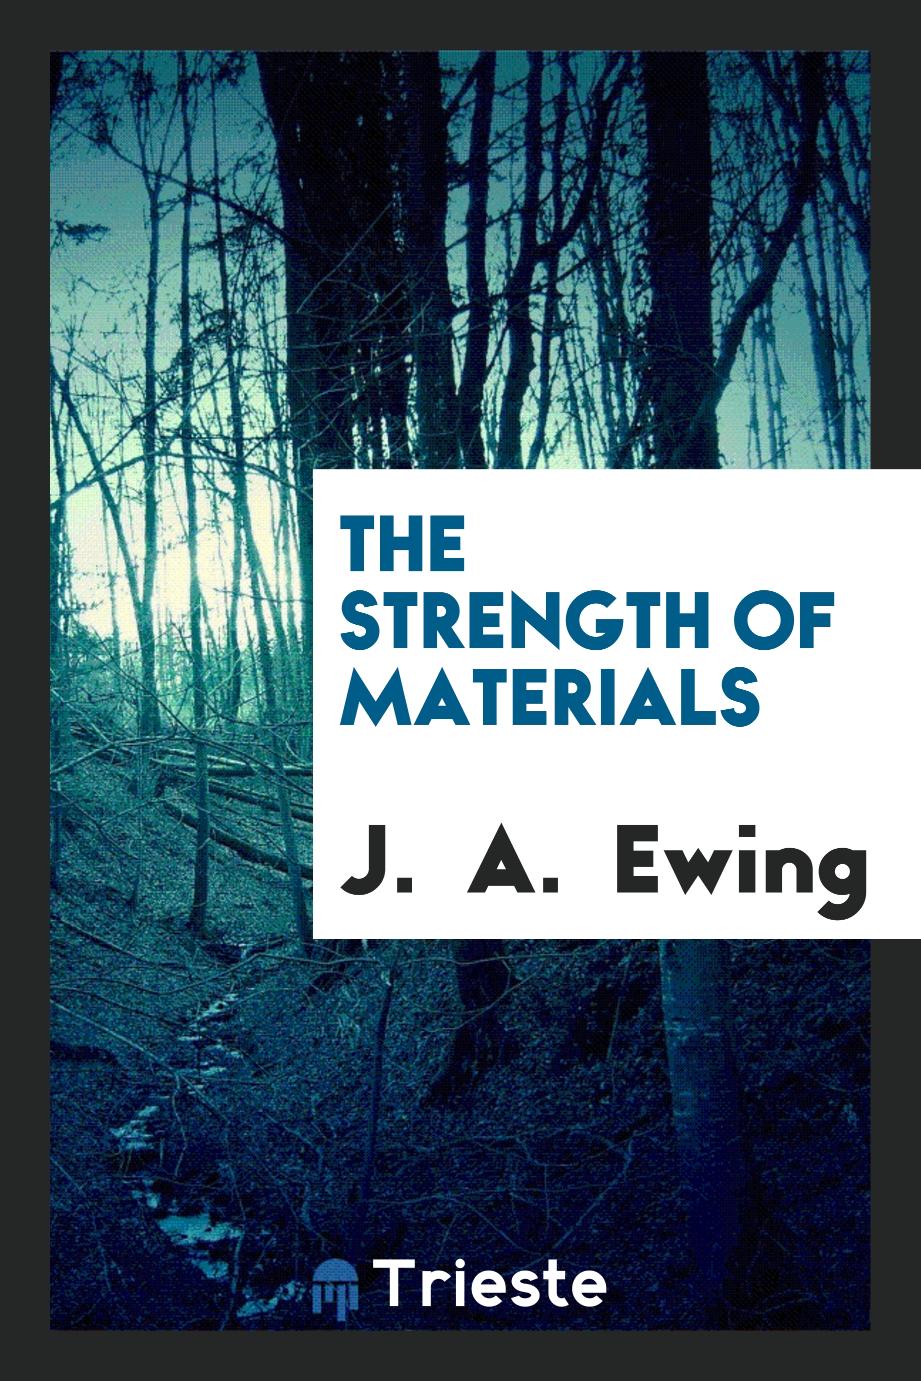 The Strength of Materials